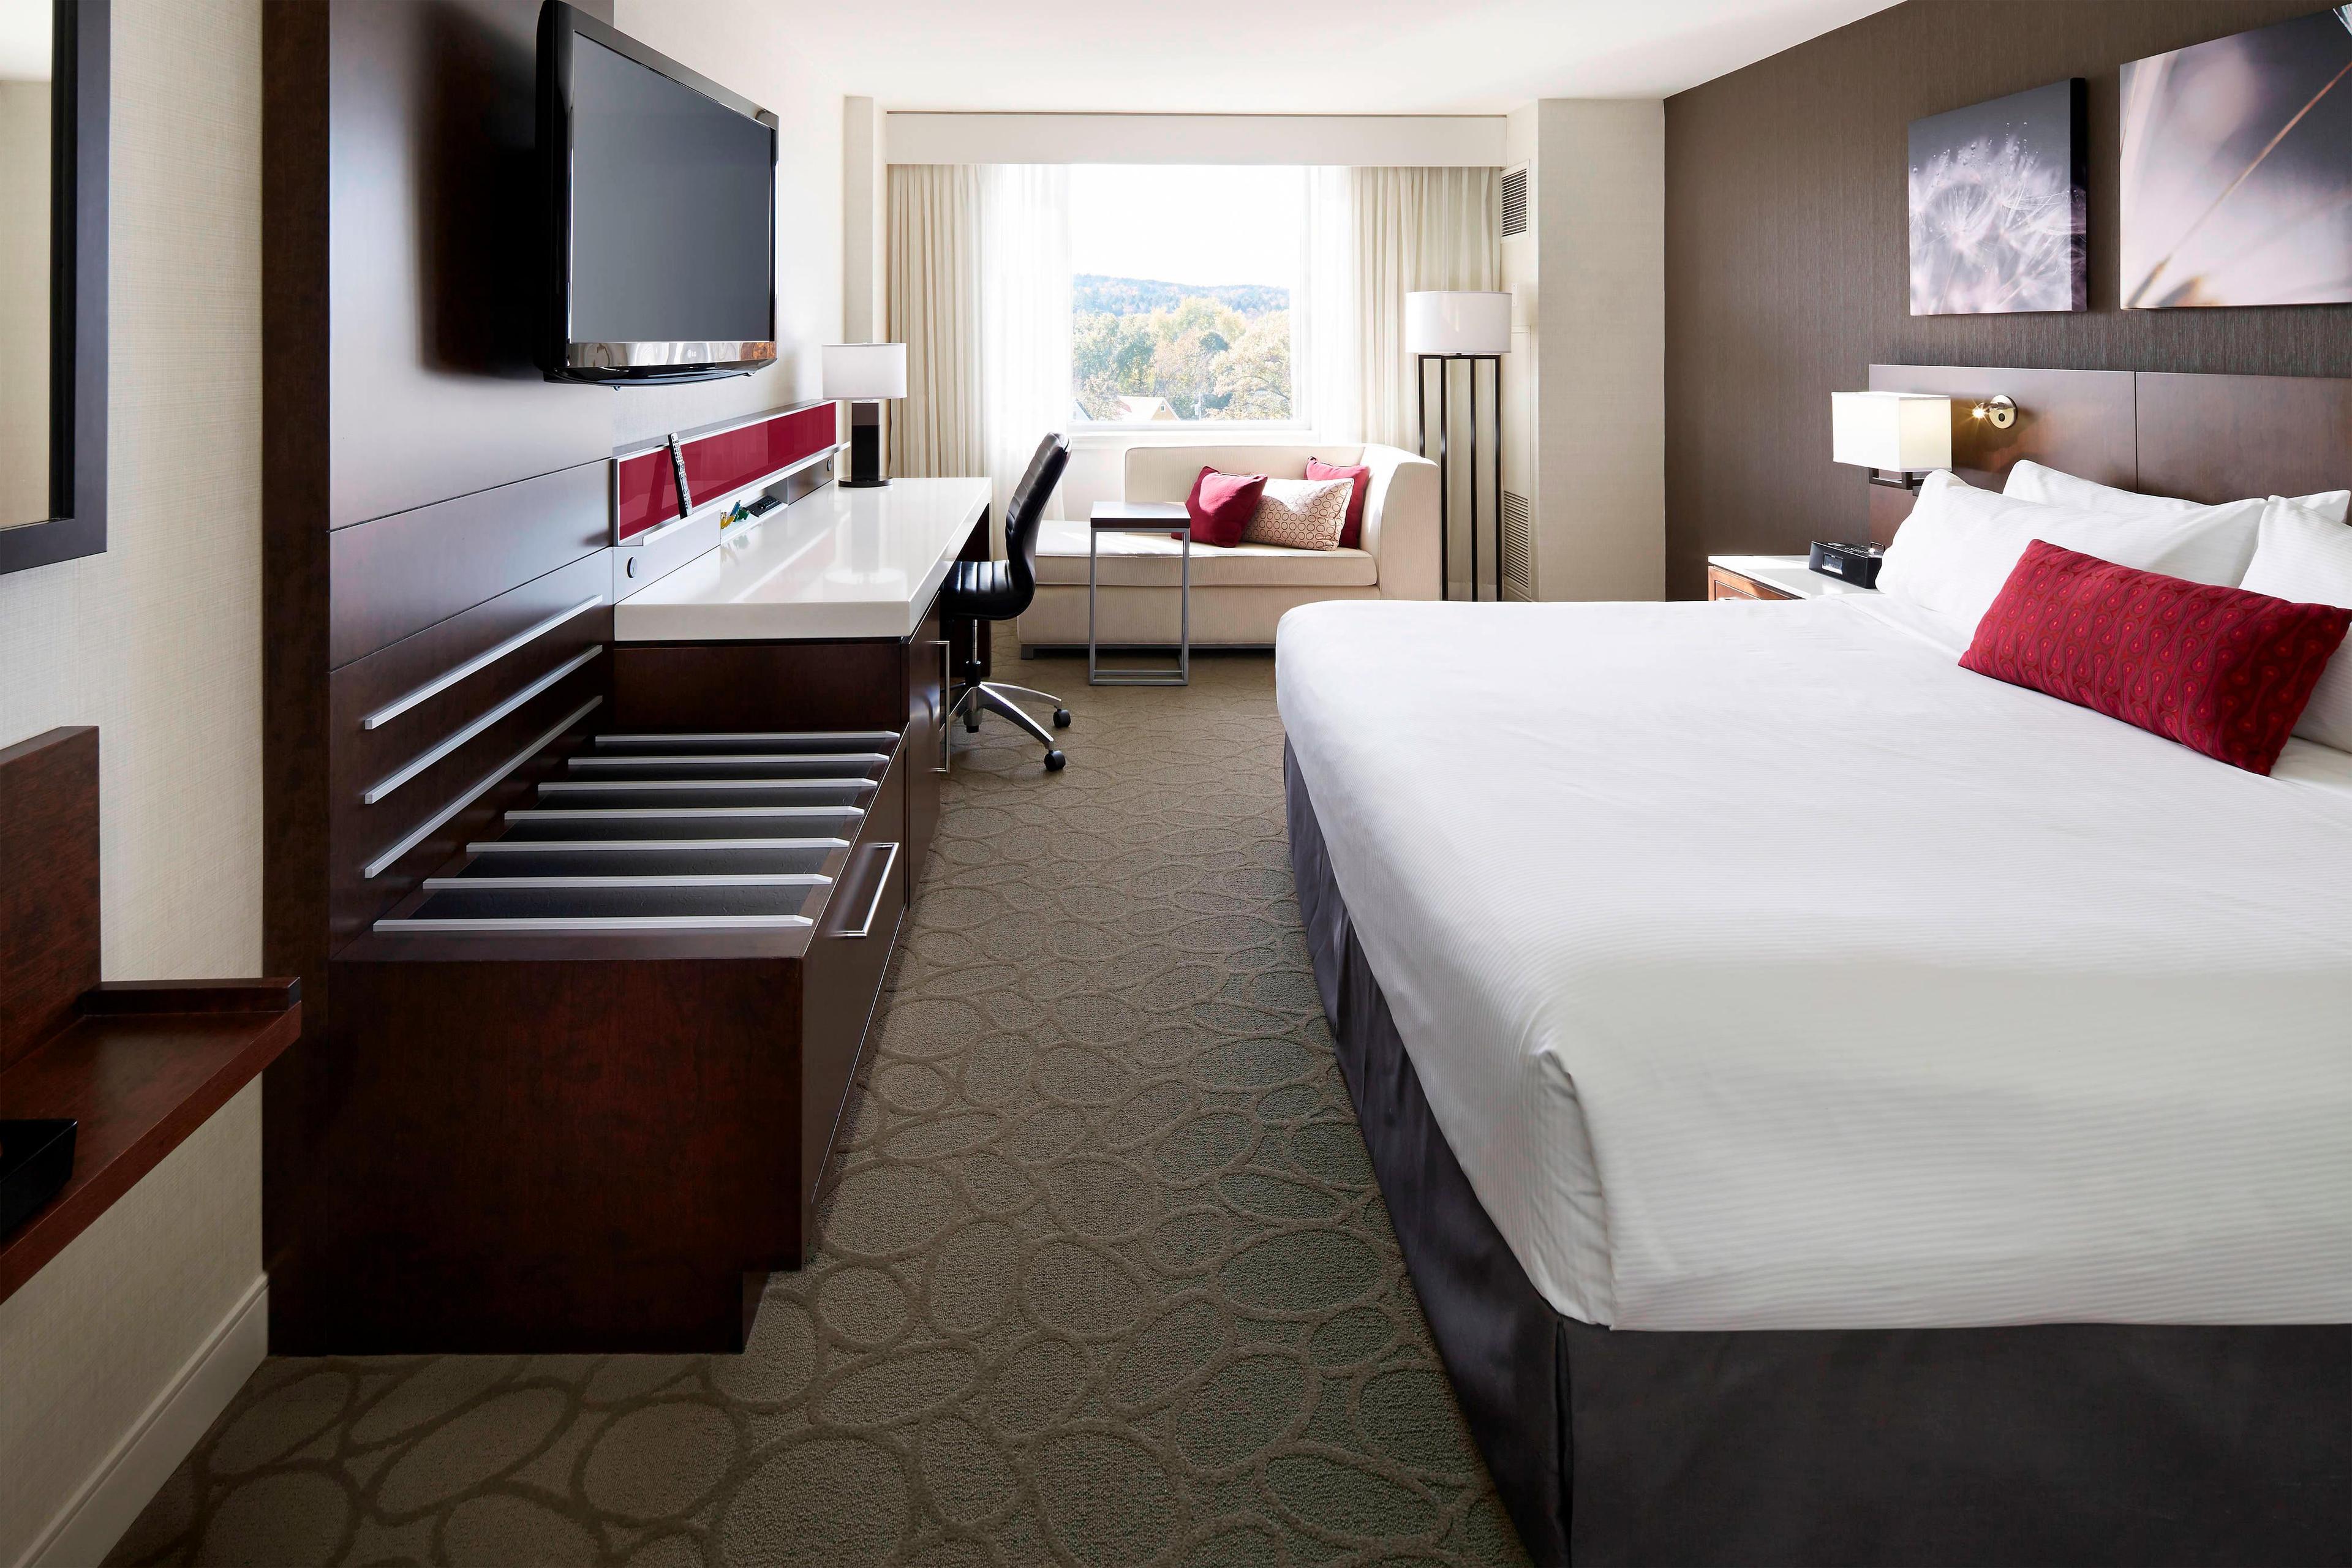 Relax on your comfortable bed while watching premium channels on the flat screen TV in your contemporary guest room.